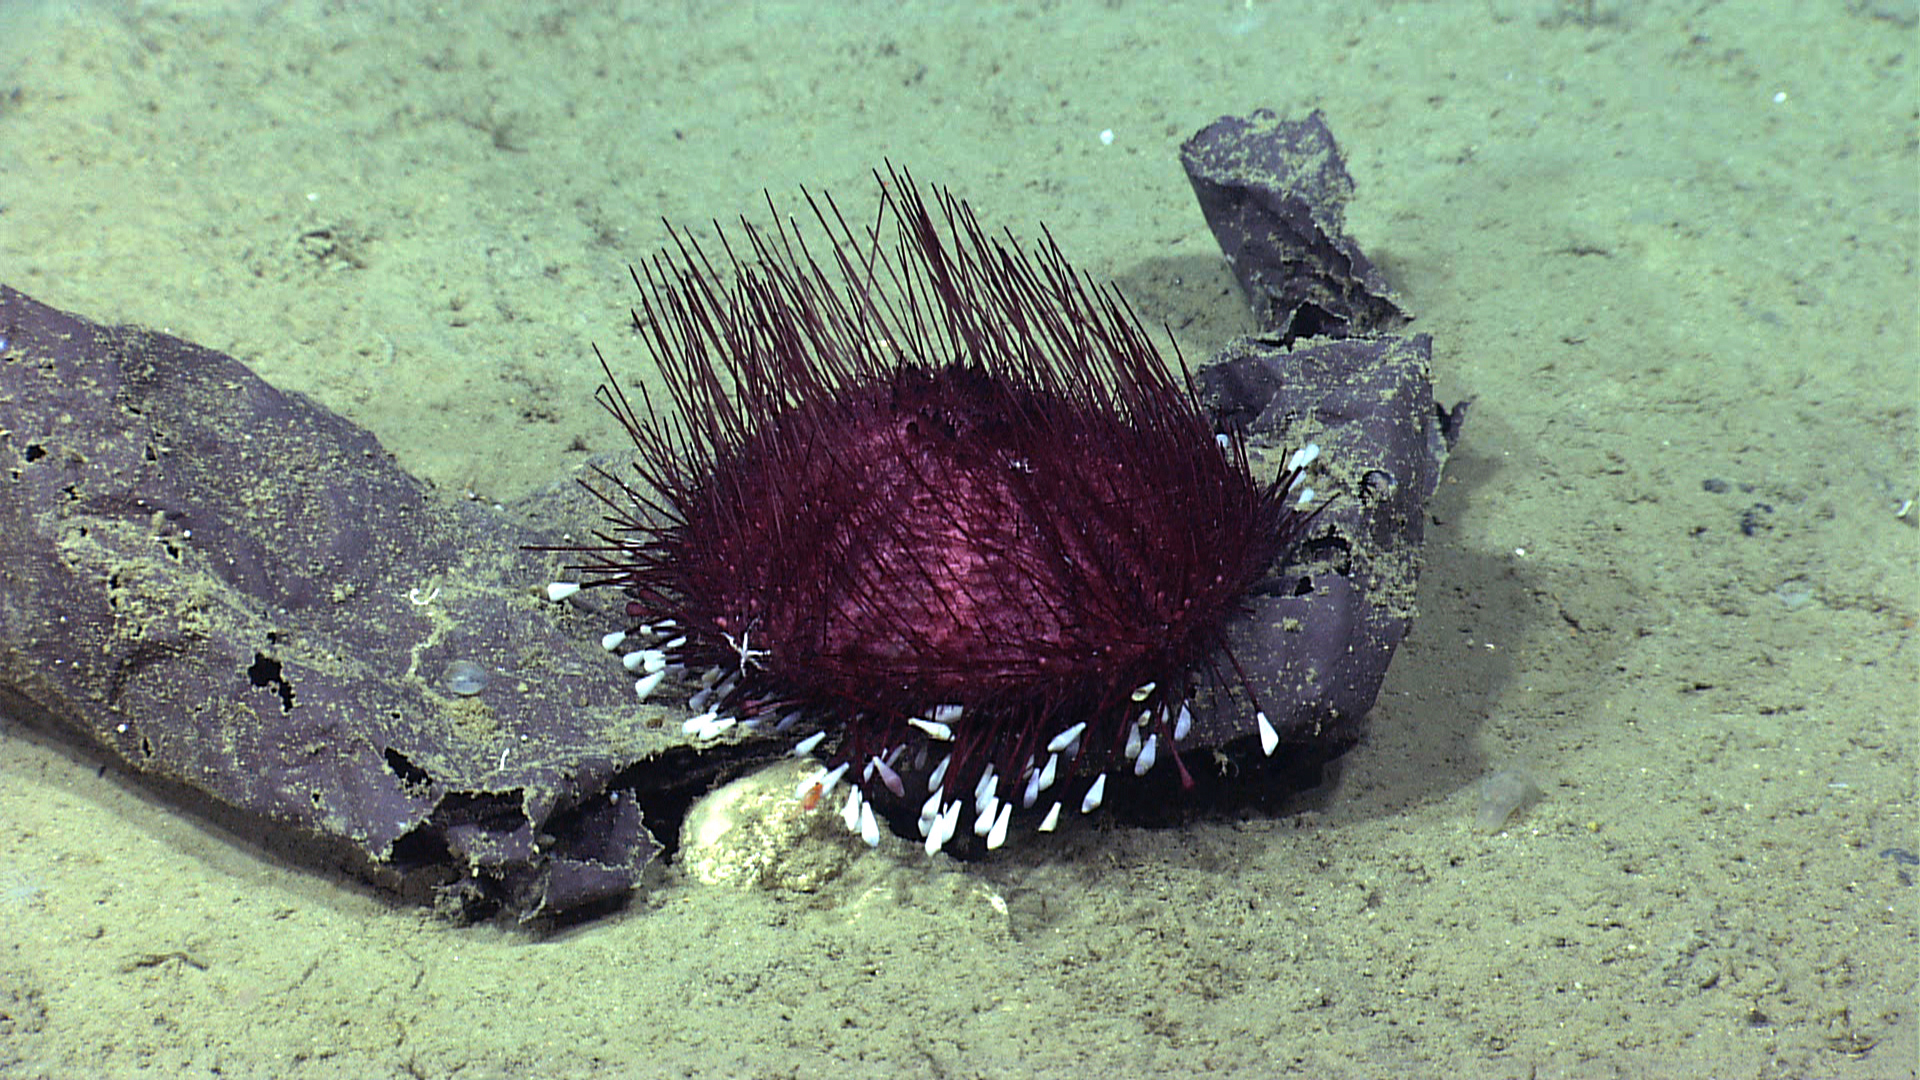 Unlike urchins along the shore, these deep-sea urchins don’t have a hard skeleton. When brought to the surface they deflate into their namesake pancake shape.